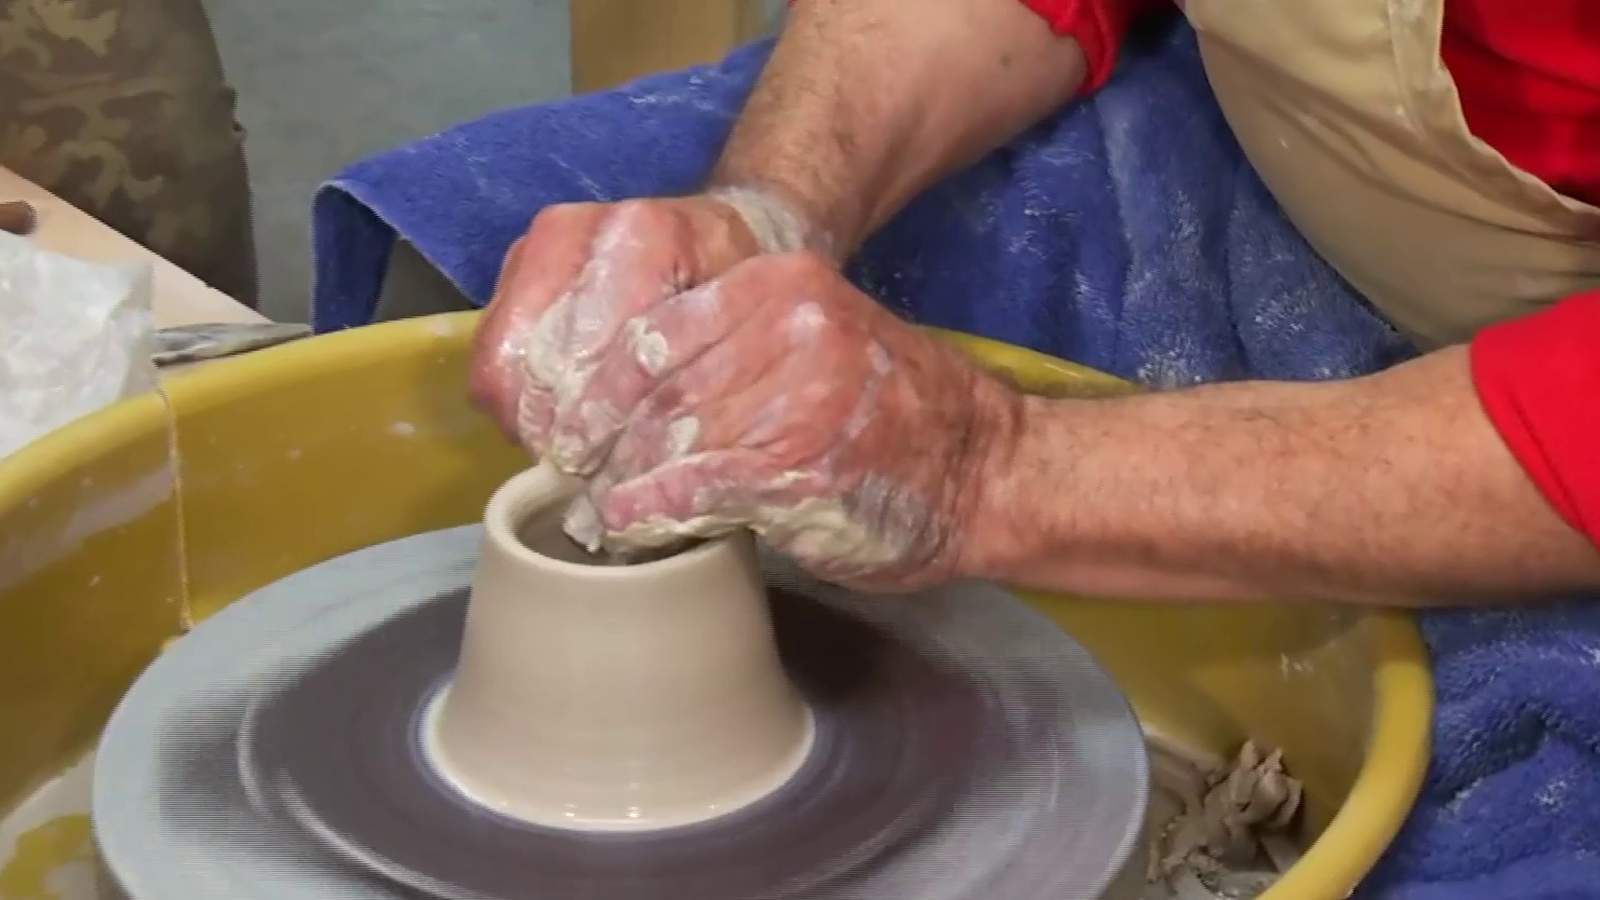 Watch artists make their crafts from start to finish at Artisan Saturdays